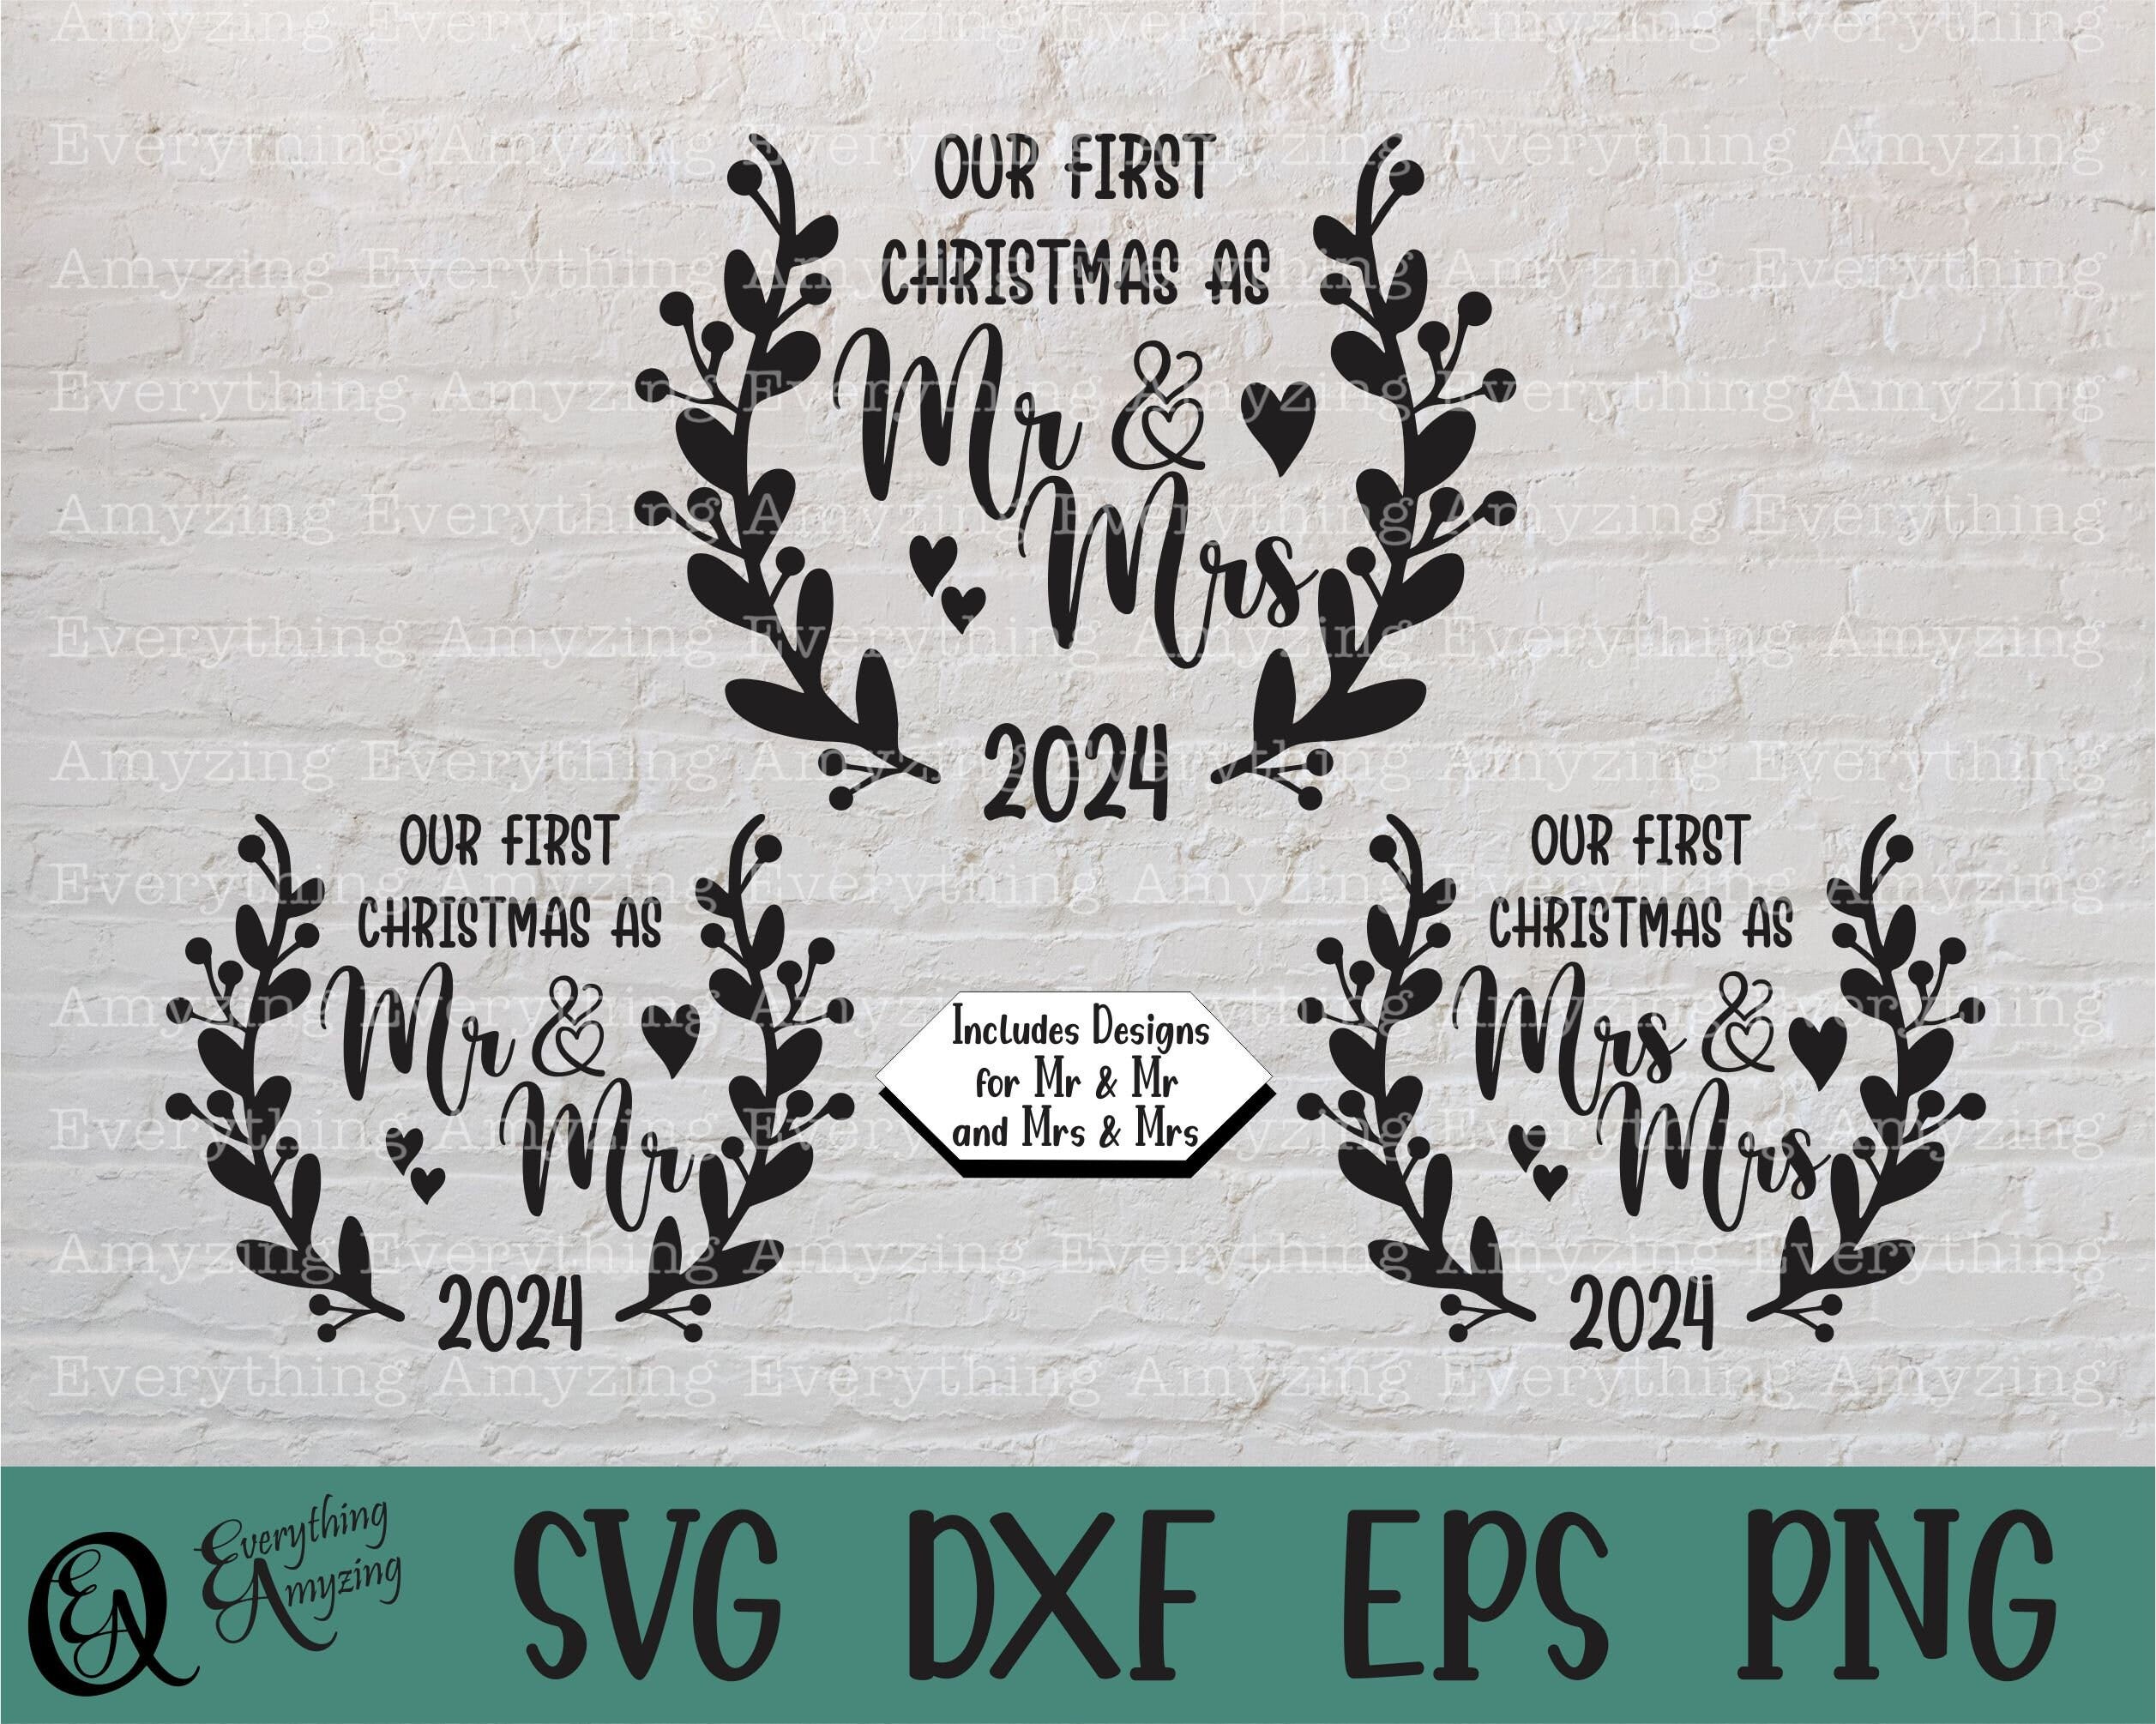 Our First Christmas as Mr and Mrs svg, Mr & Mrs svg, Christmas svg, Mr and Mr, Mrs and Mrs, Cricut svg, Silhouette svg, svg, png, eps, dxf